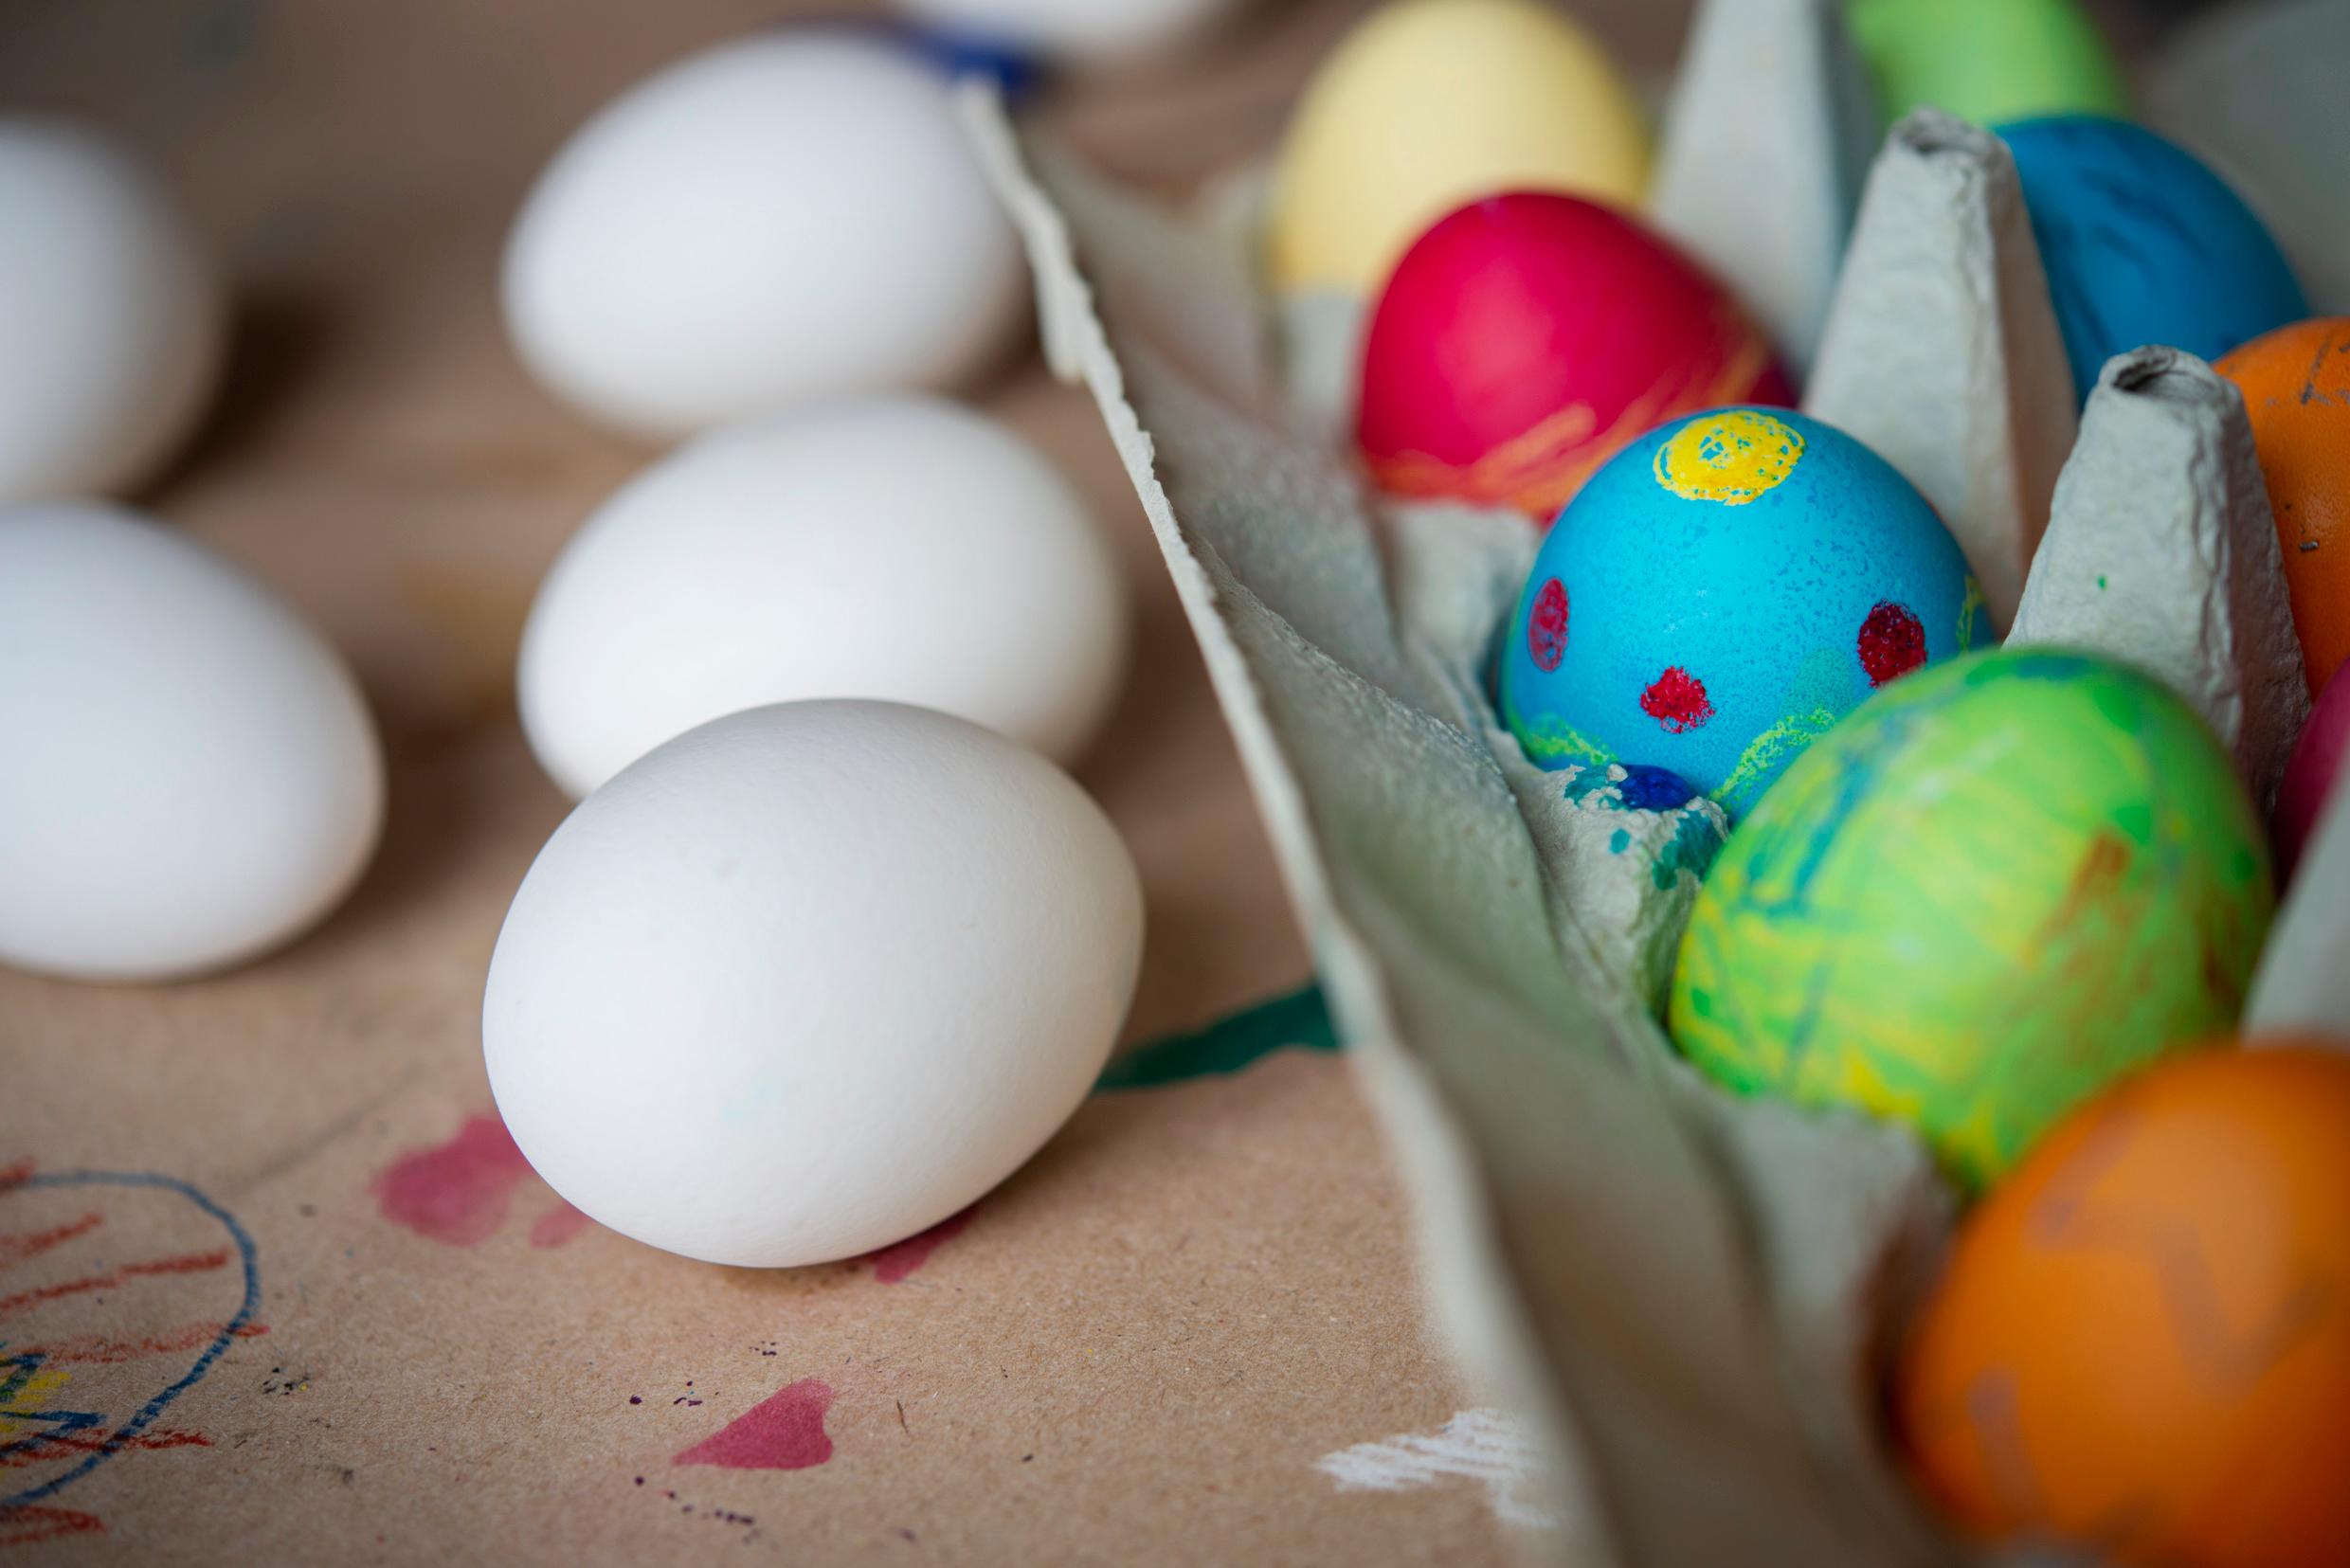 Eggs lay on a table, some painted, some unpainted.